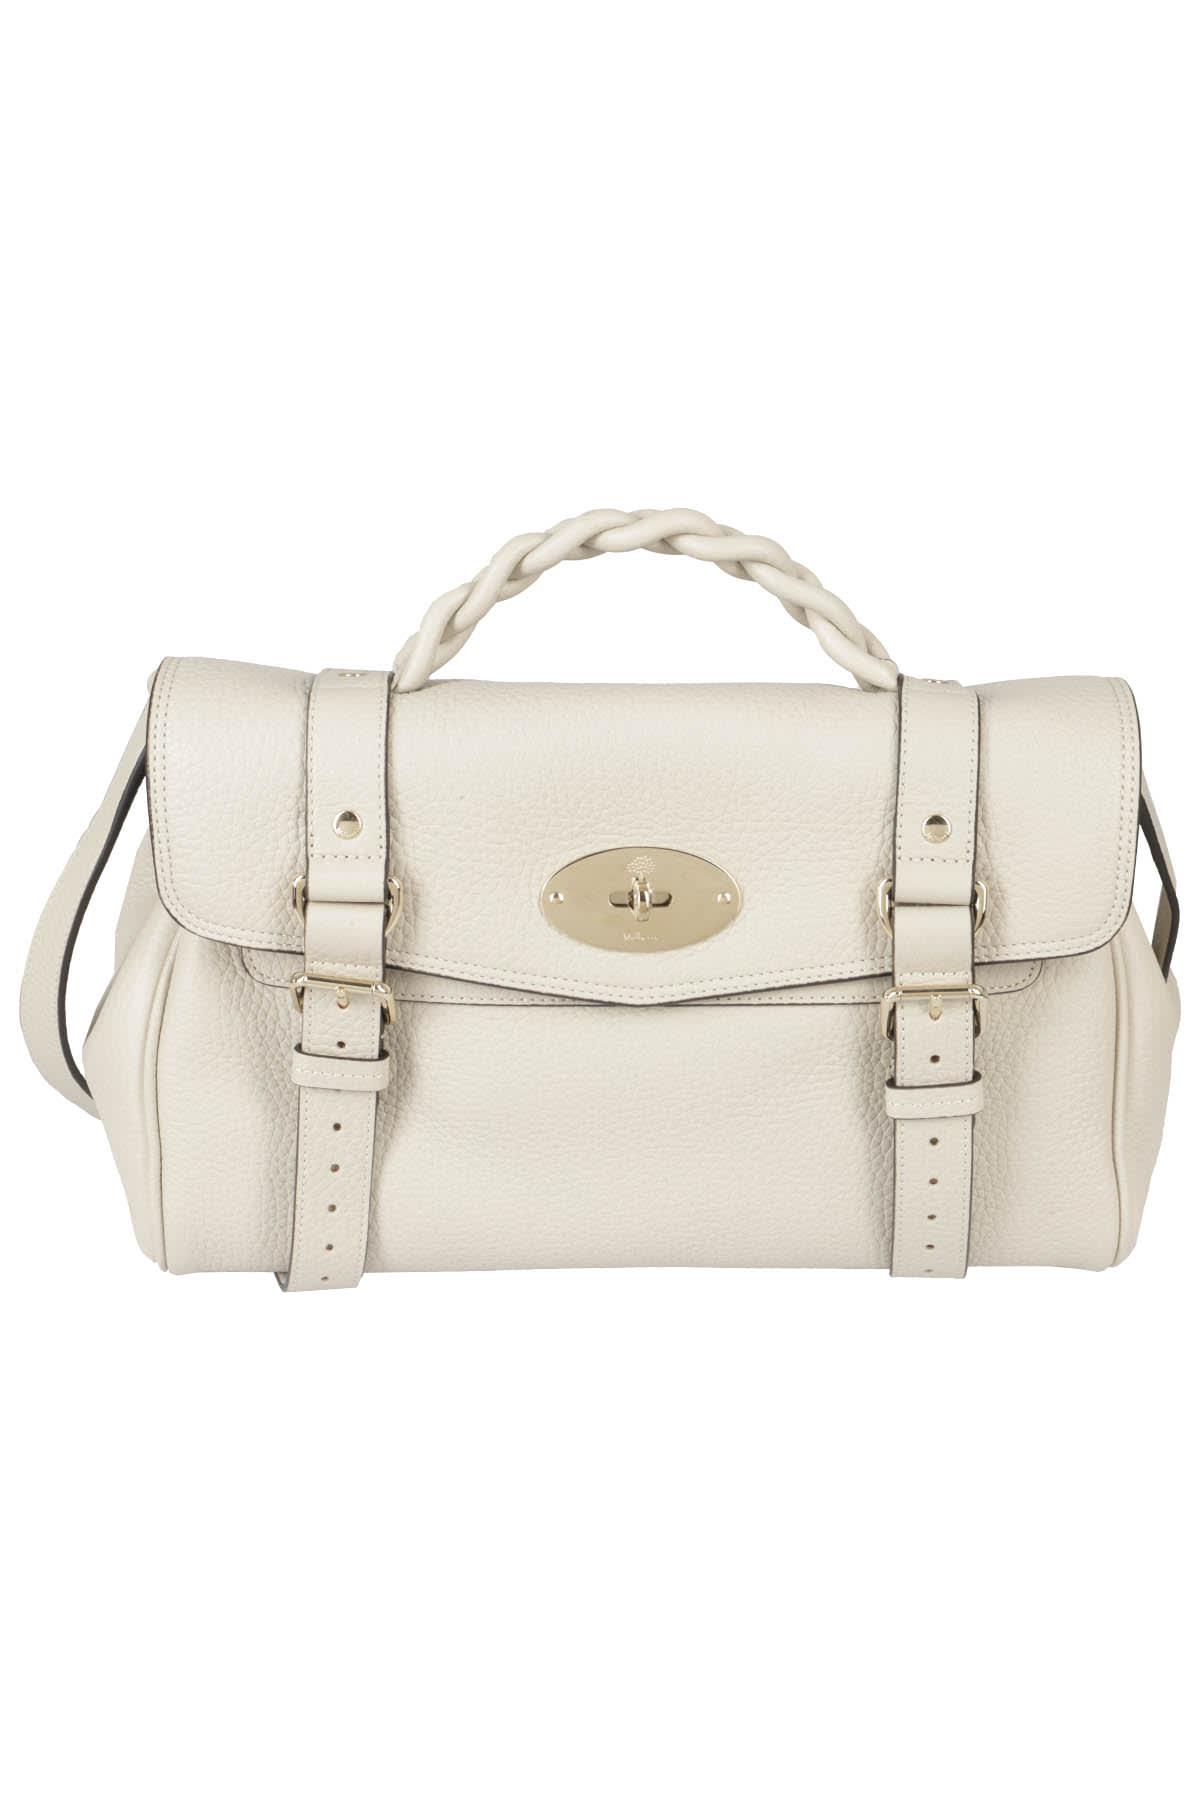 Mulberry Alexa Heavy Grain in Natural | Lyst